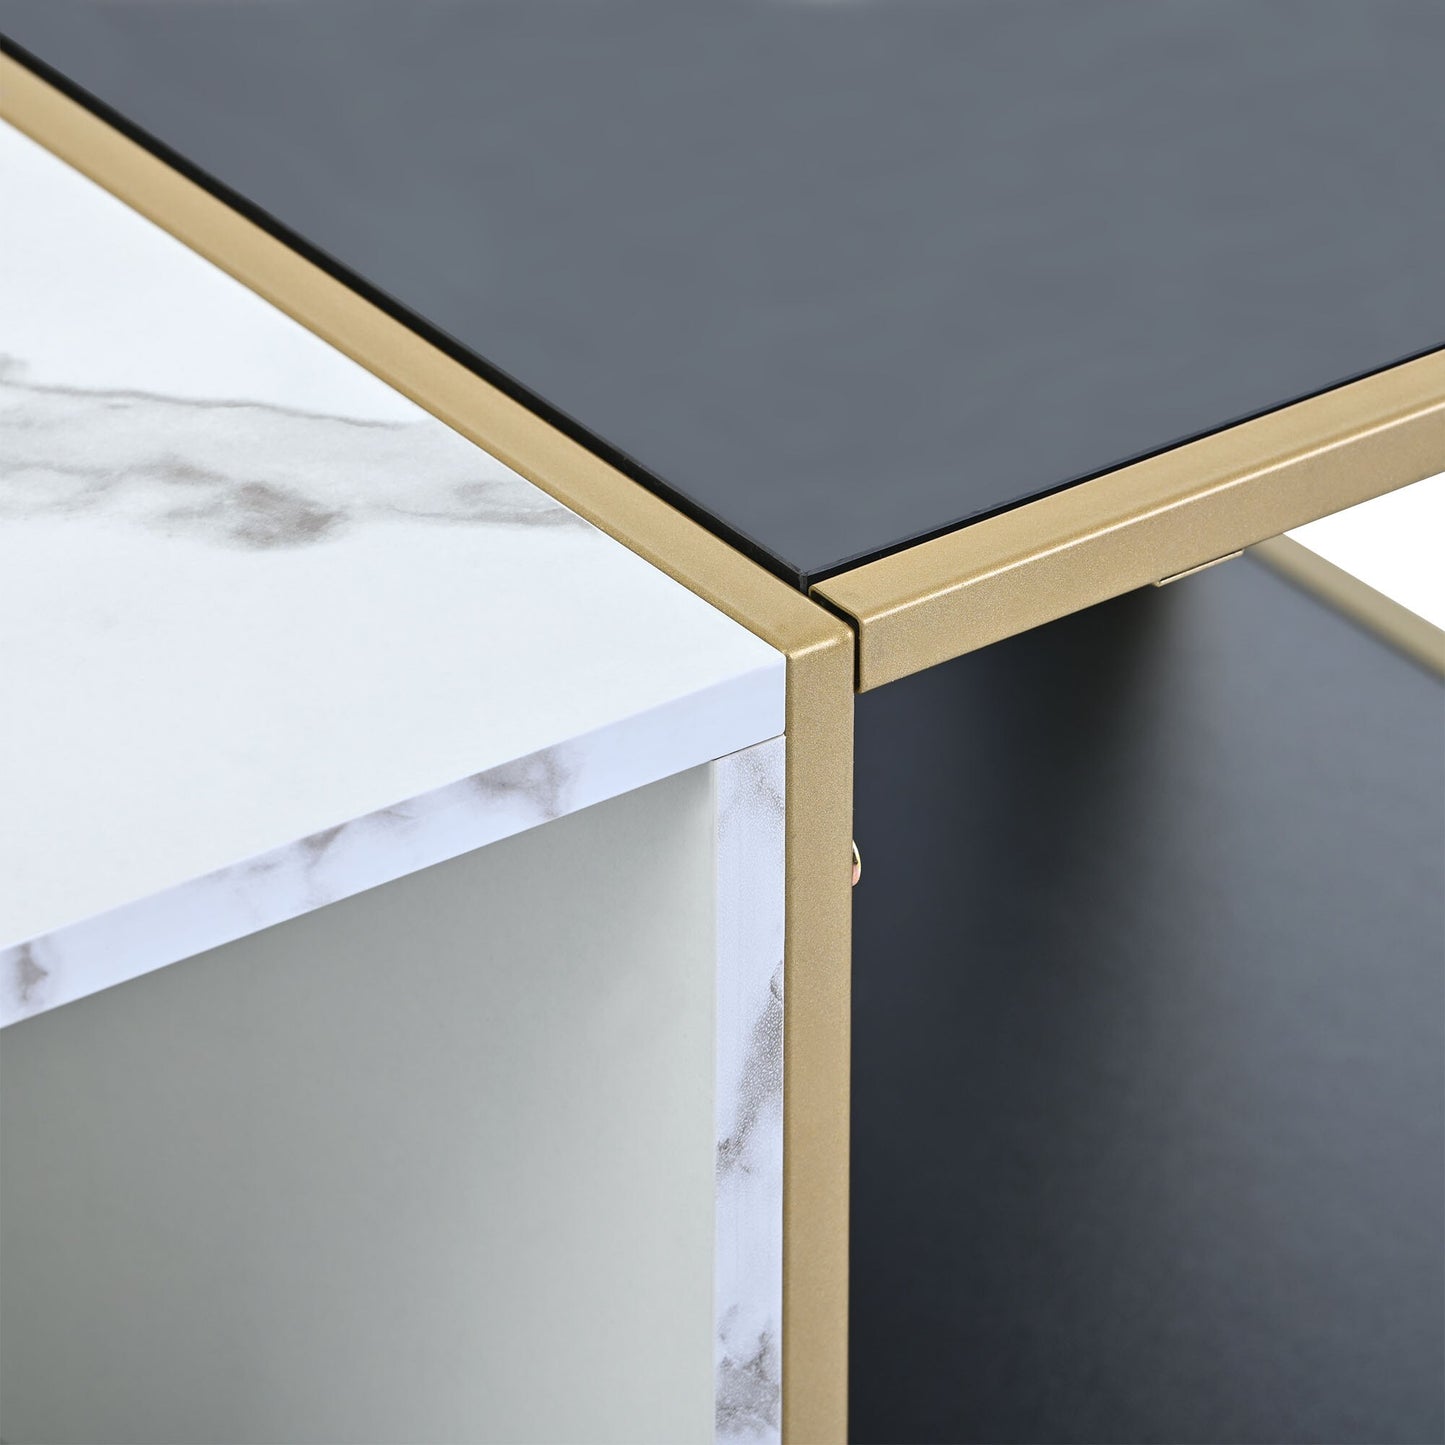 2-Layer Modern Coffee Table with High Gloss White Marble Finish